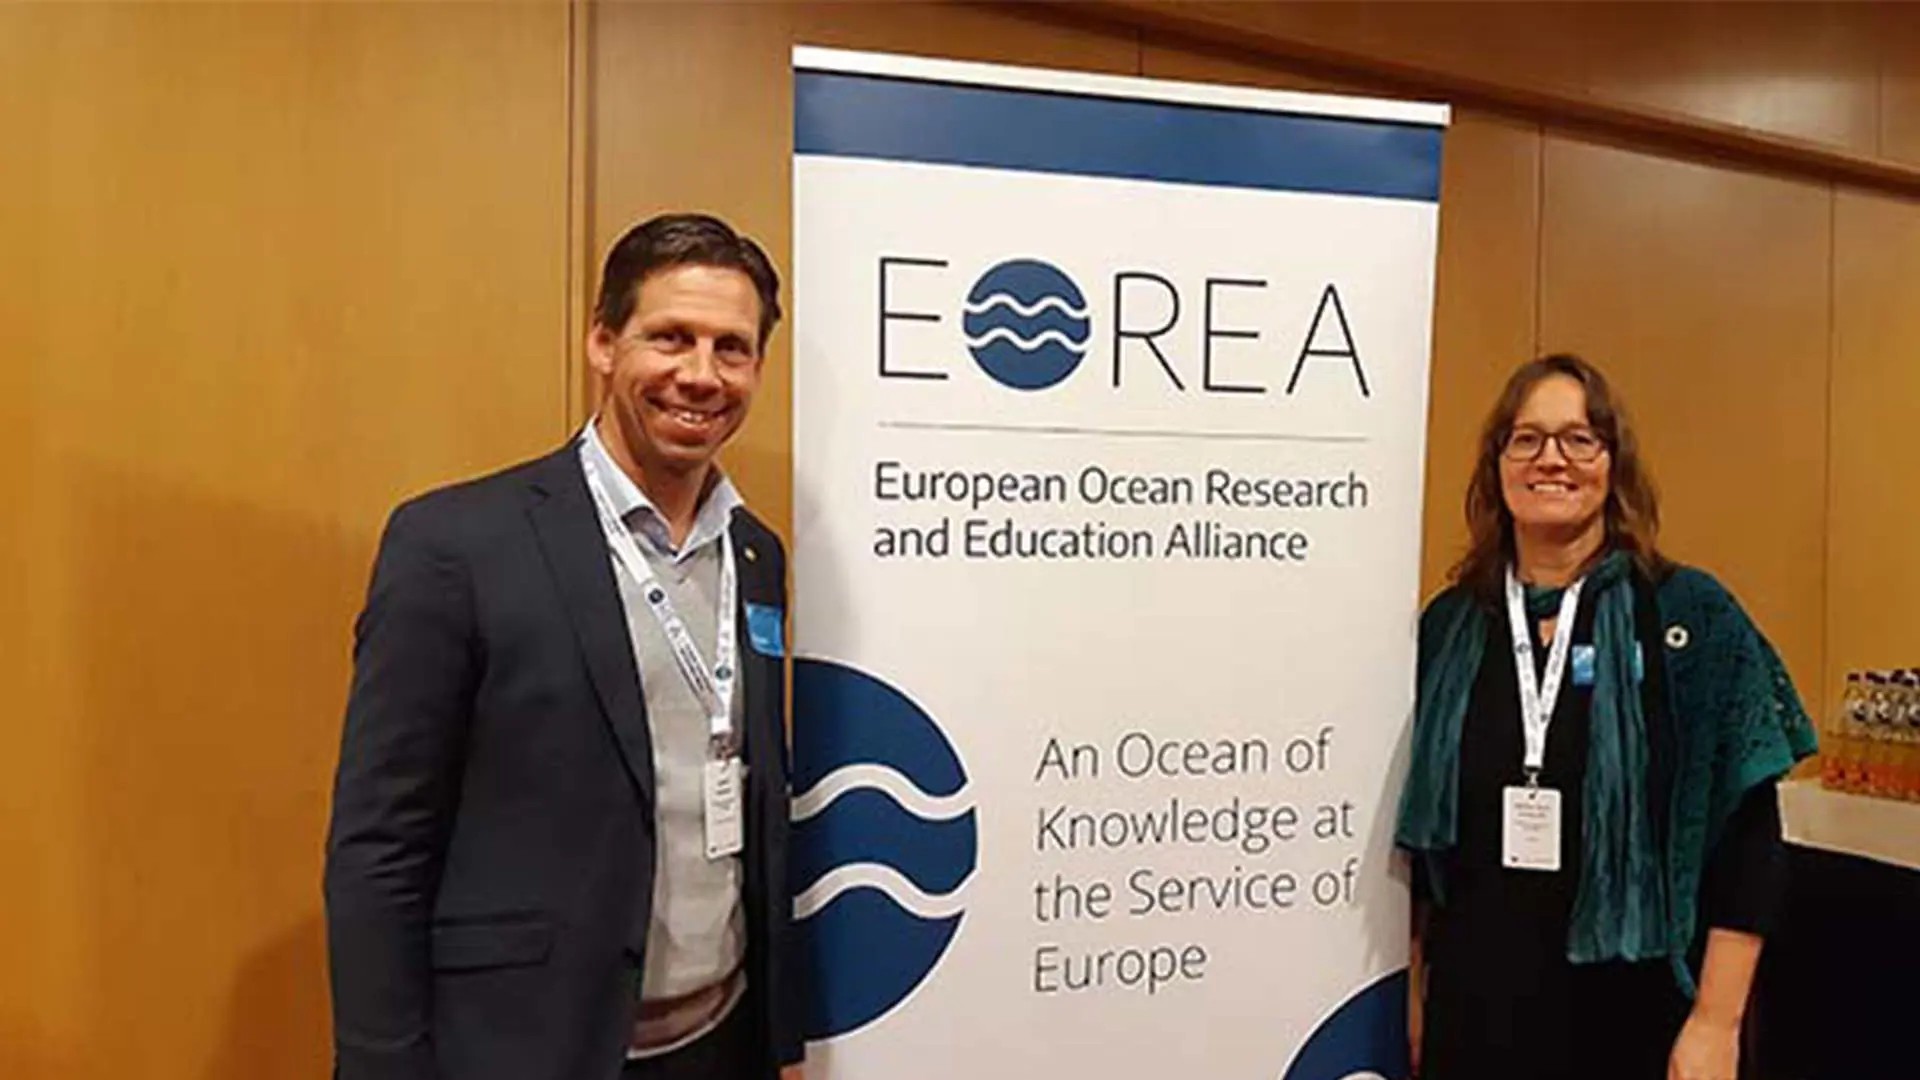 On site at the European Parliament in Brussels: Anders Palmqvist, Vice President of research and Areas of Advance at Chalmers, and Ida-Maja Hassellöv, Professor of Maritime Studies at Chalmers. ​​​